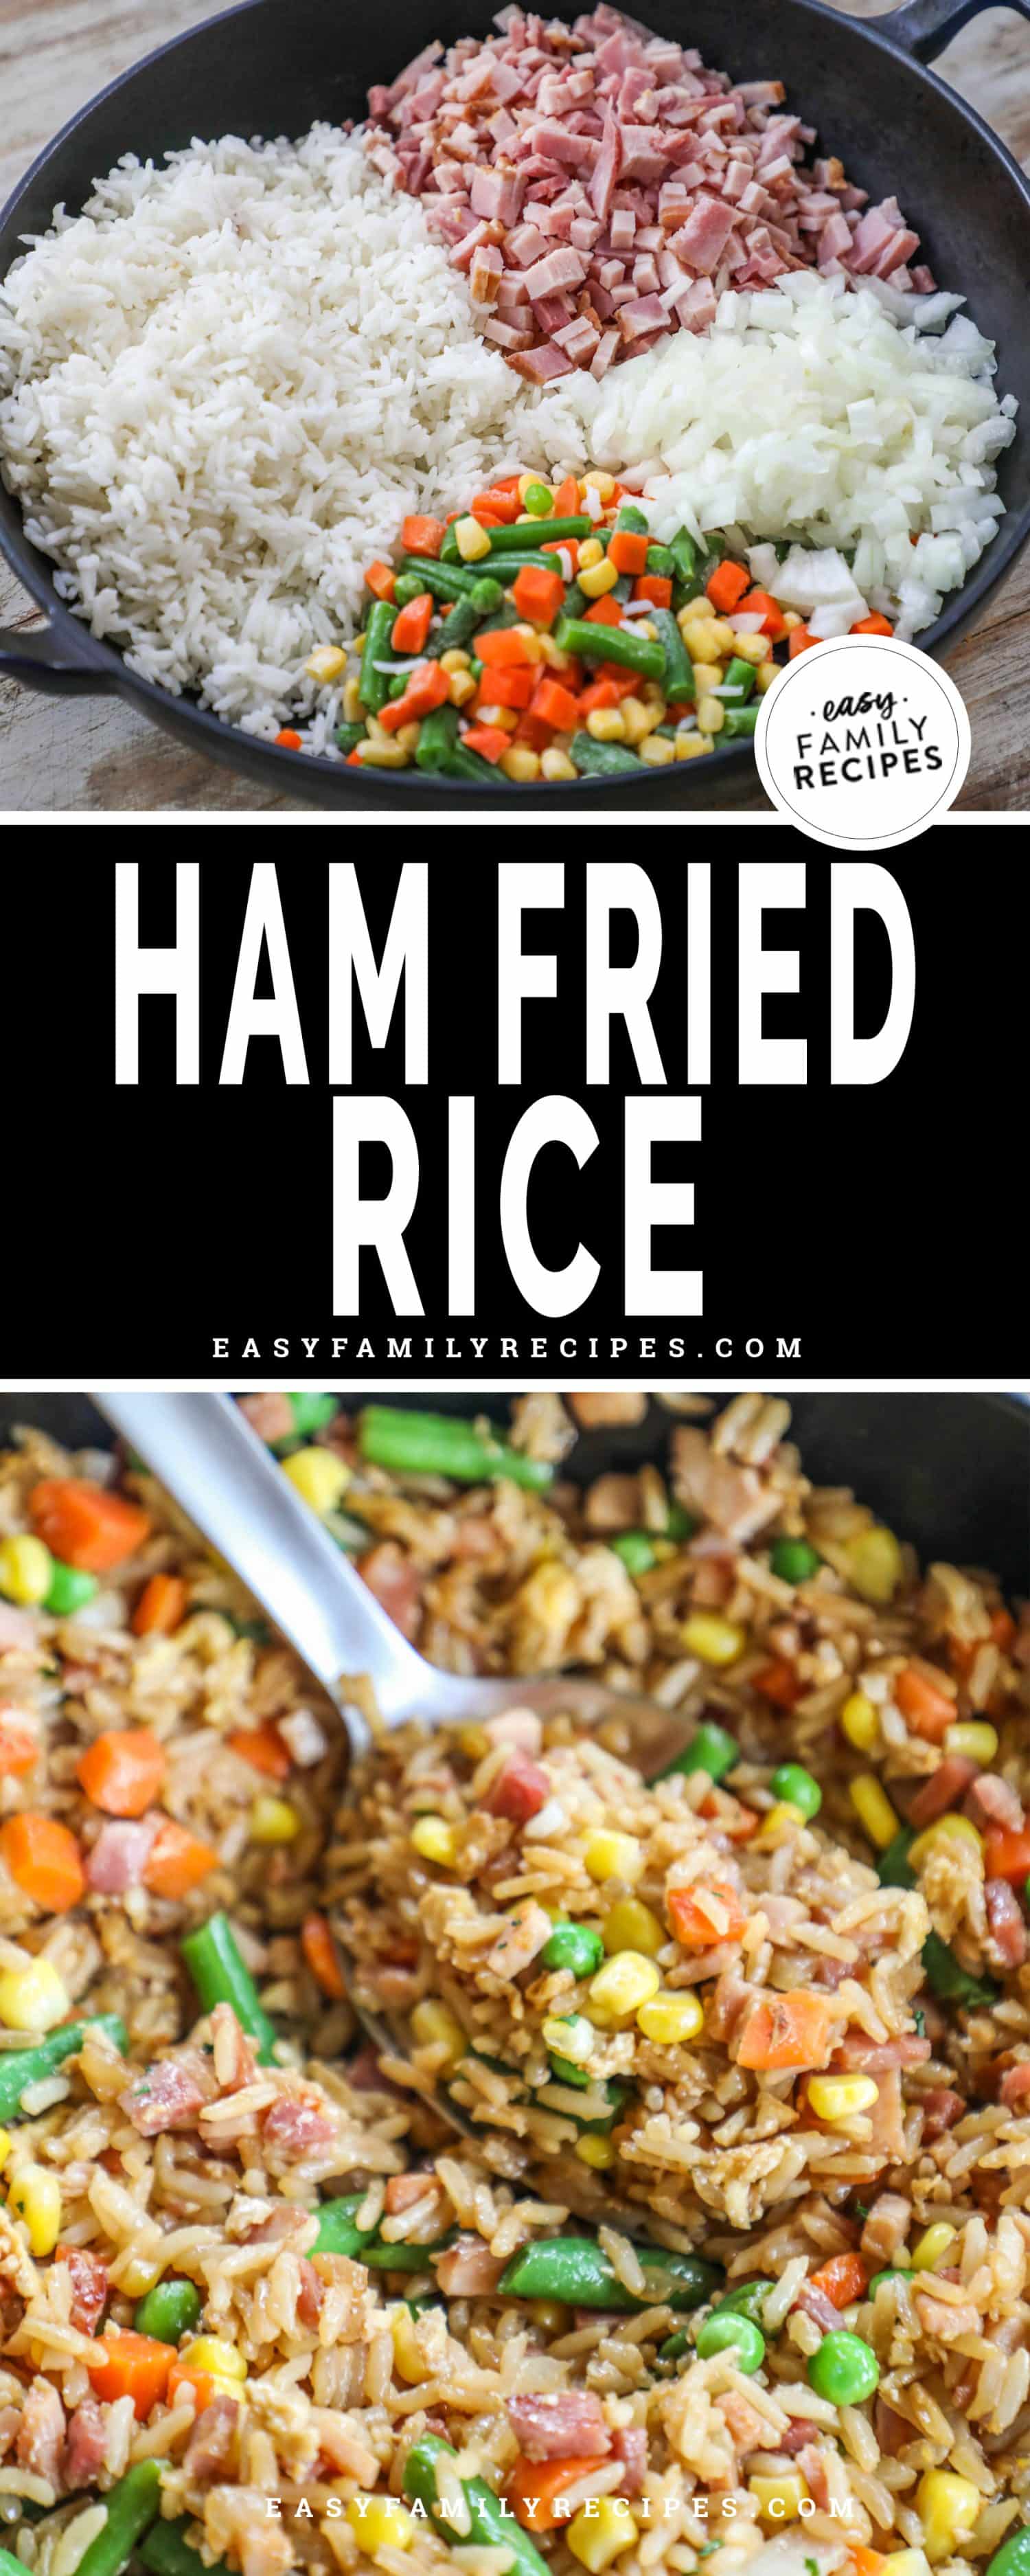 ingredients for fried rice in a skillet and finished ham fried rice.